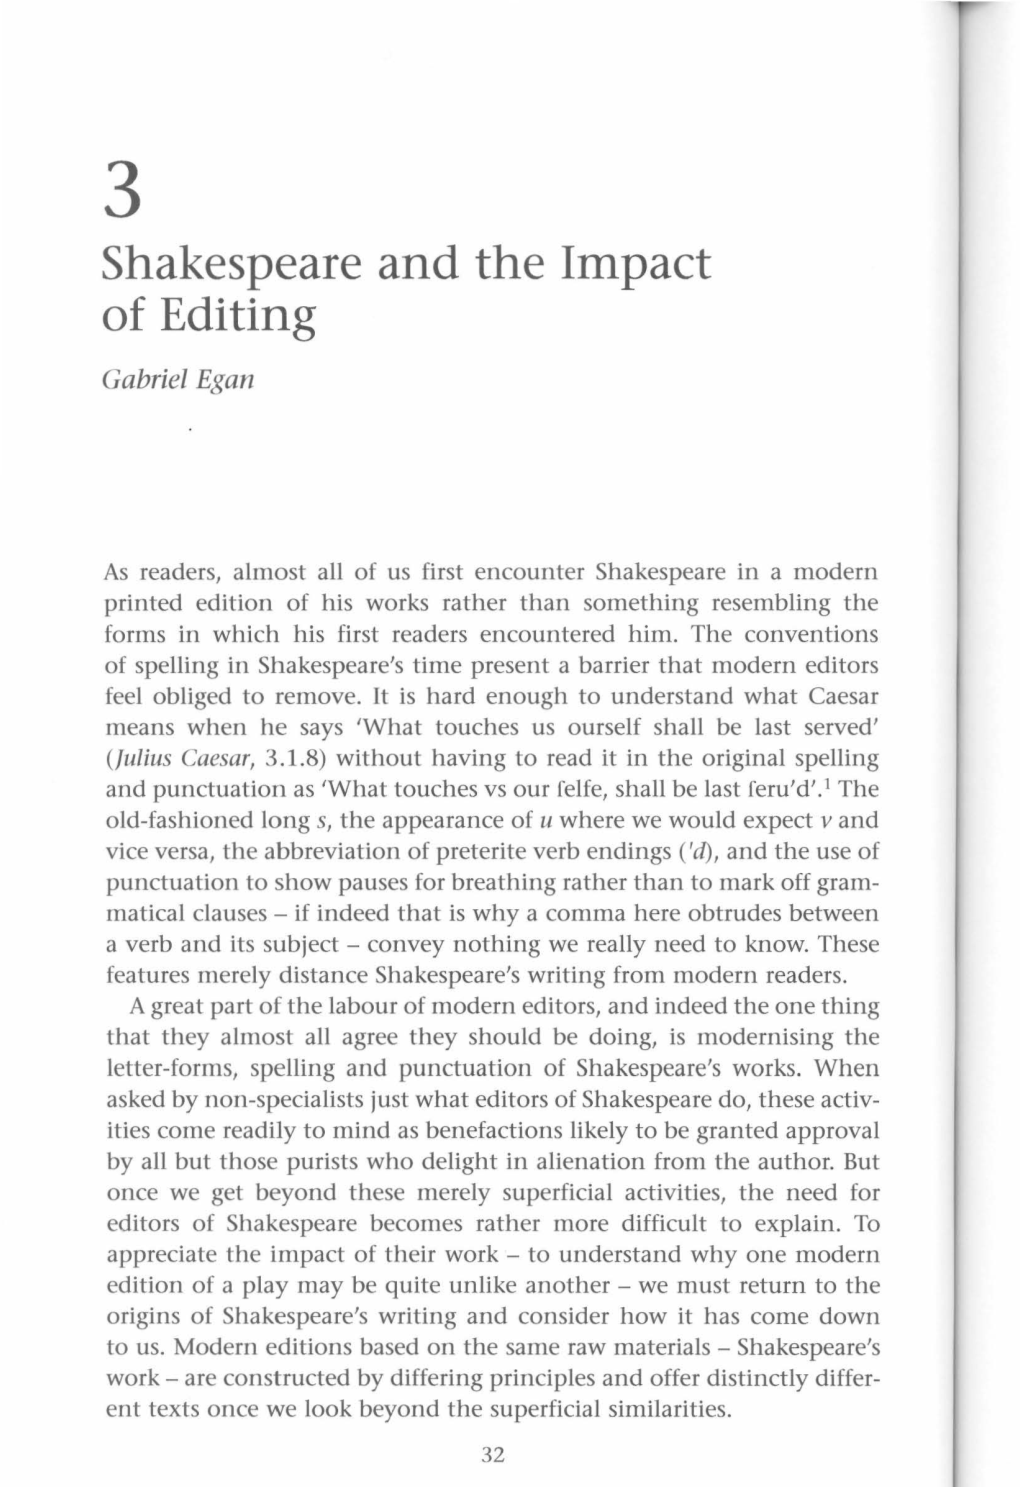 Shakespeare and the Impact of Editing